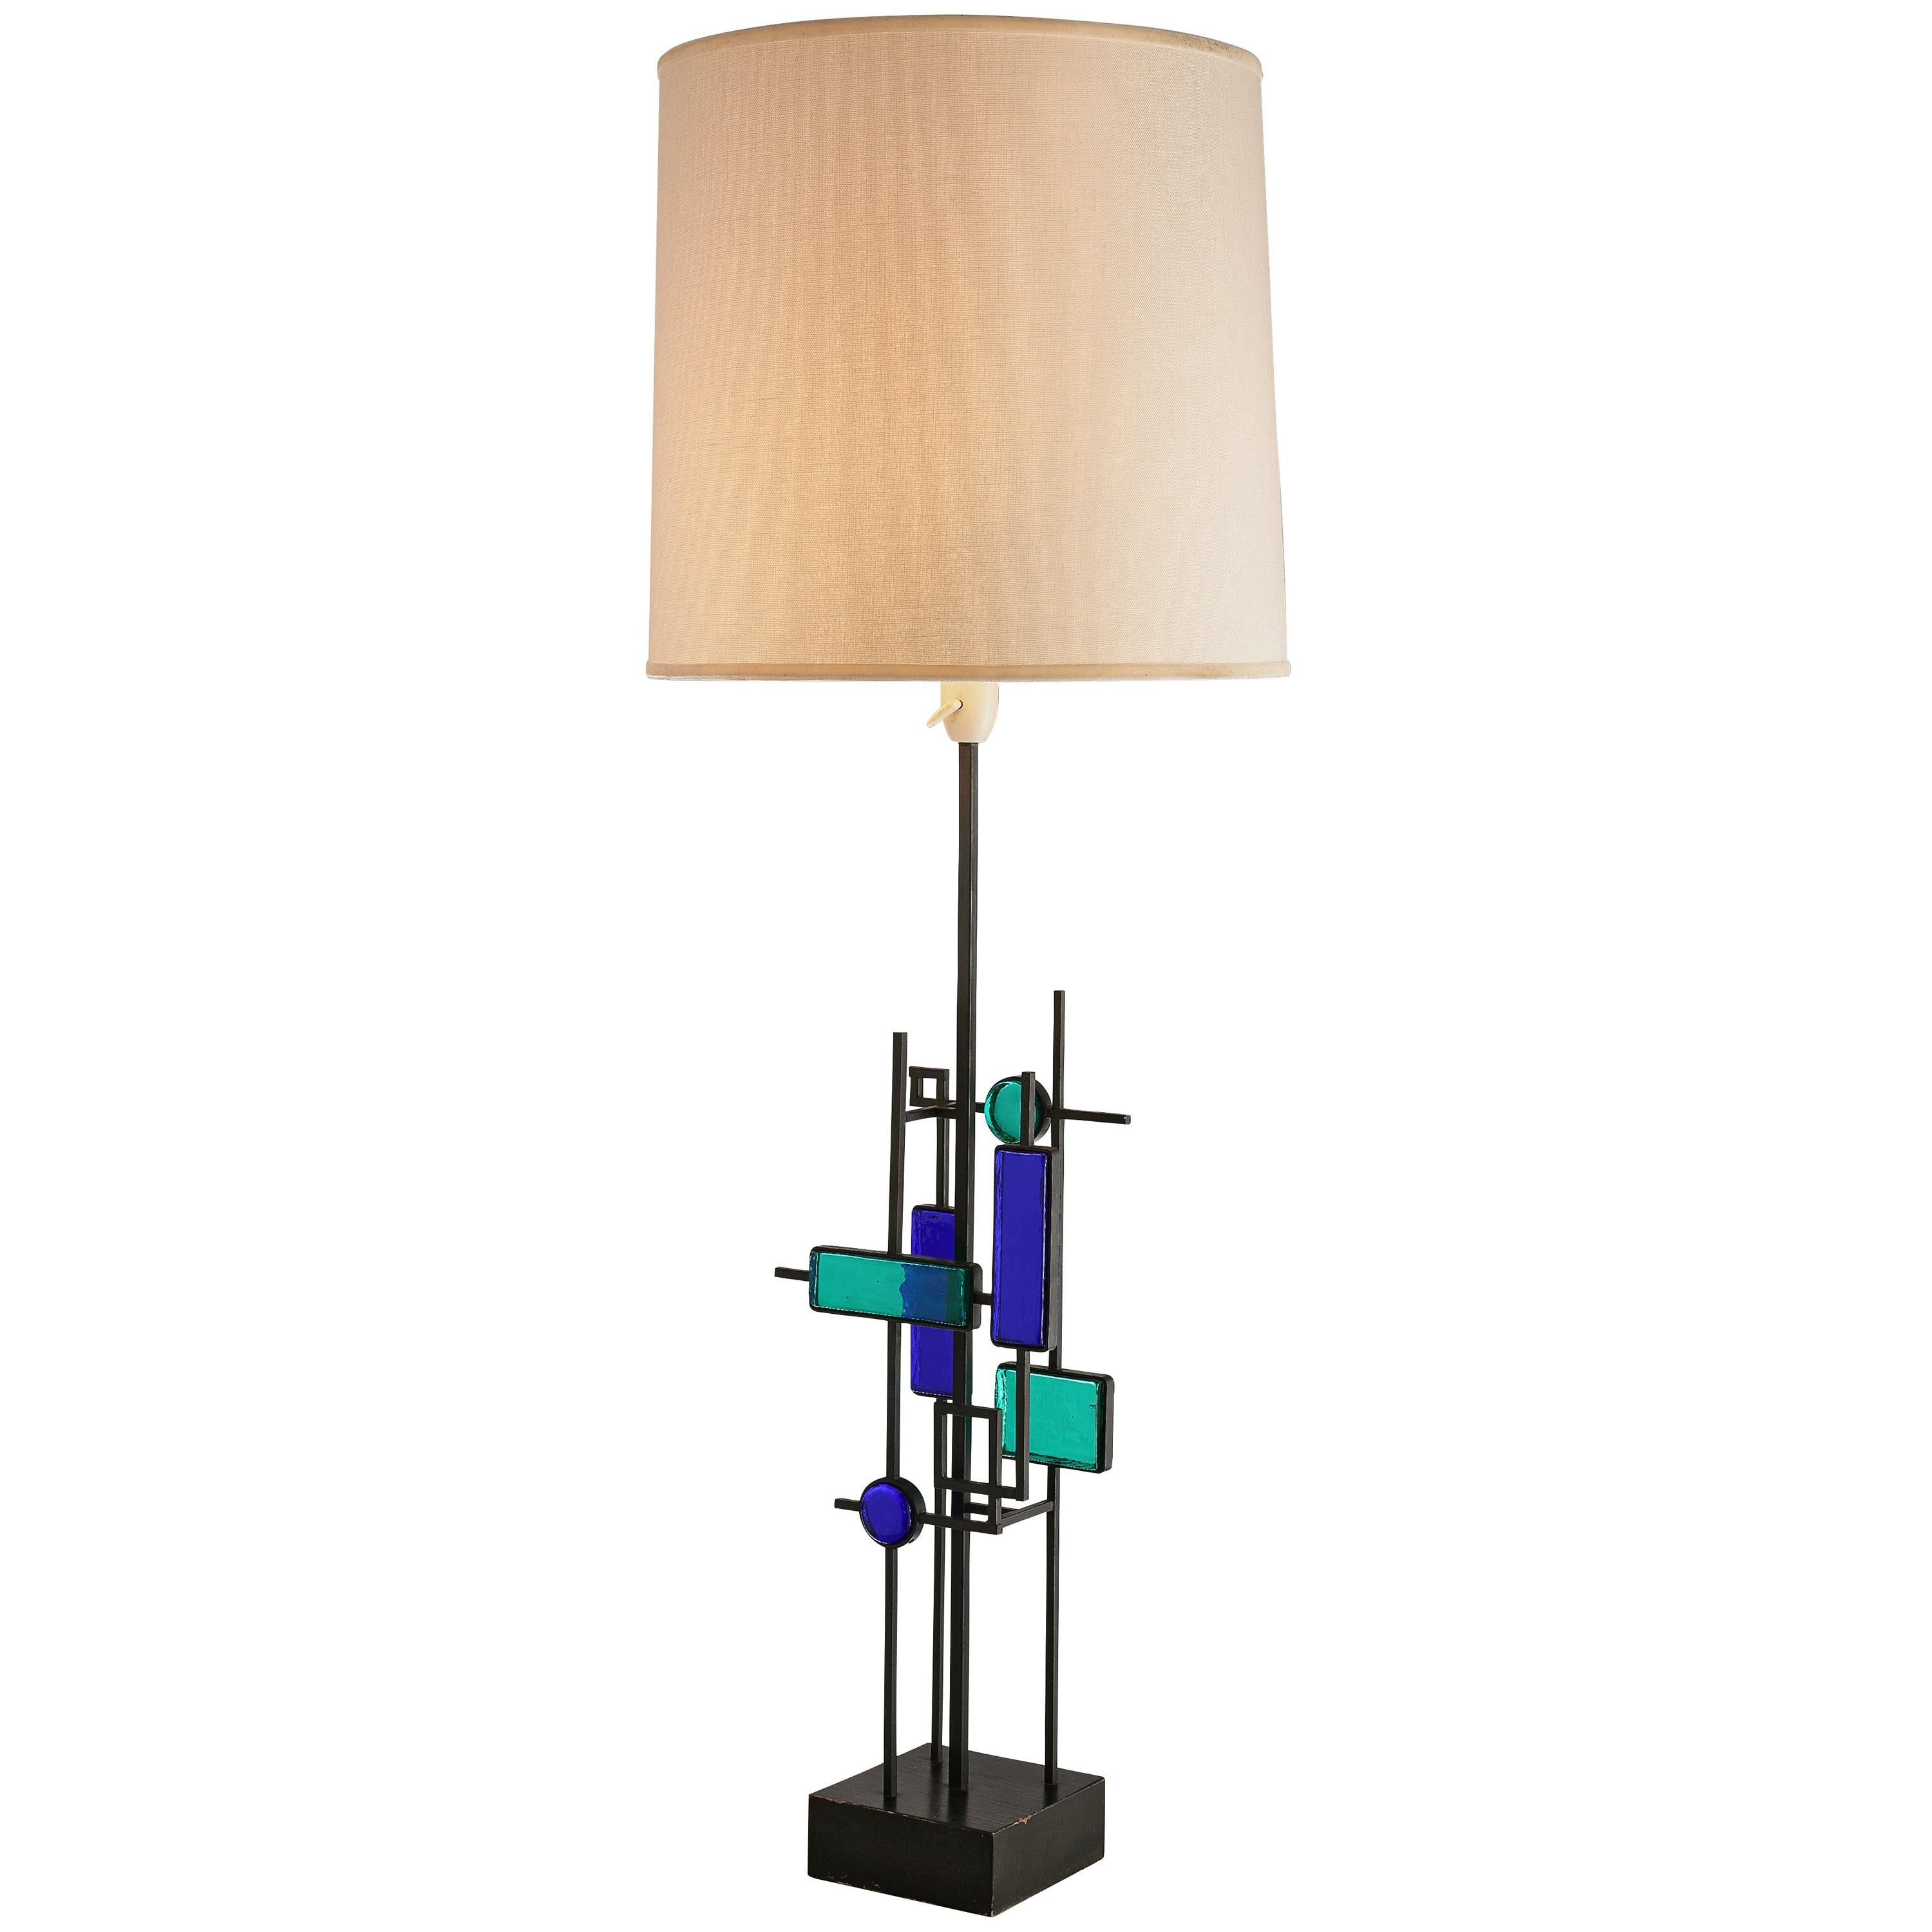  Svend Aage Holm Sørensen Sculptural Table Lamp with Iron Frame and Glass  For Sale